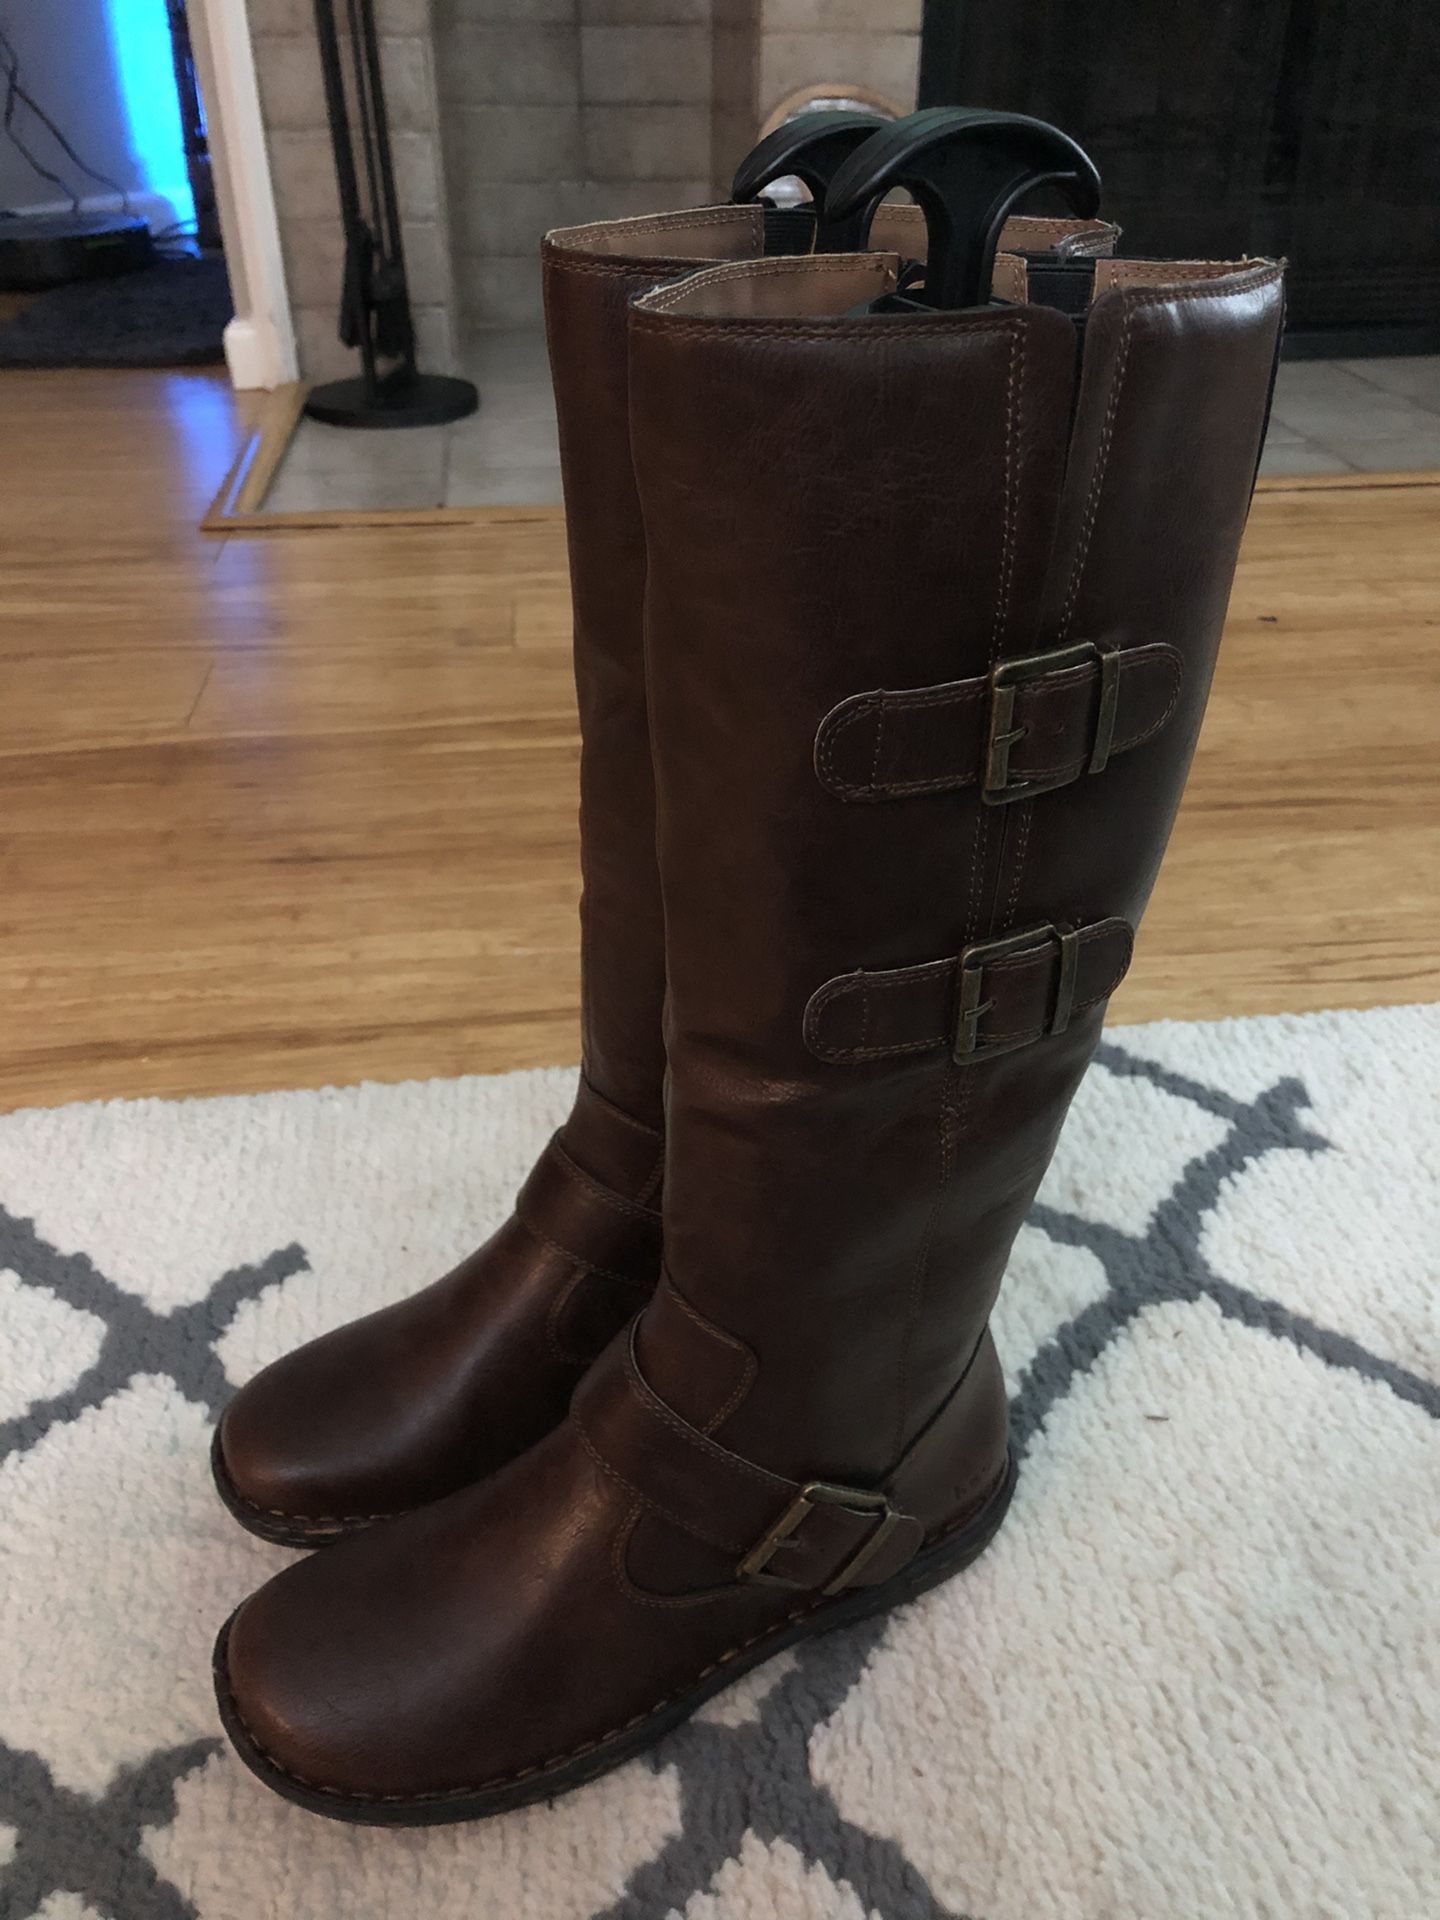 Women’s Brown Boots, size 8.5